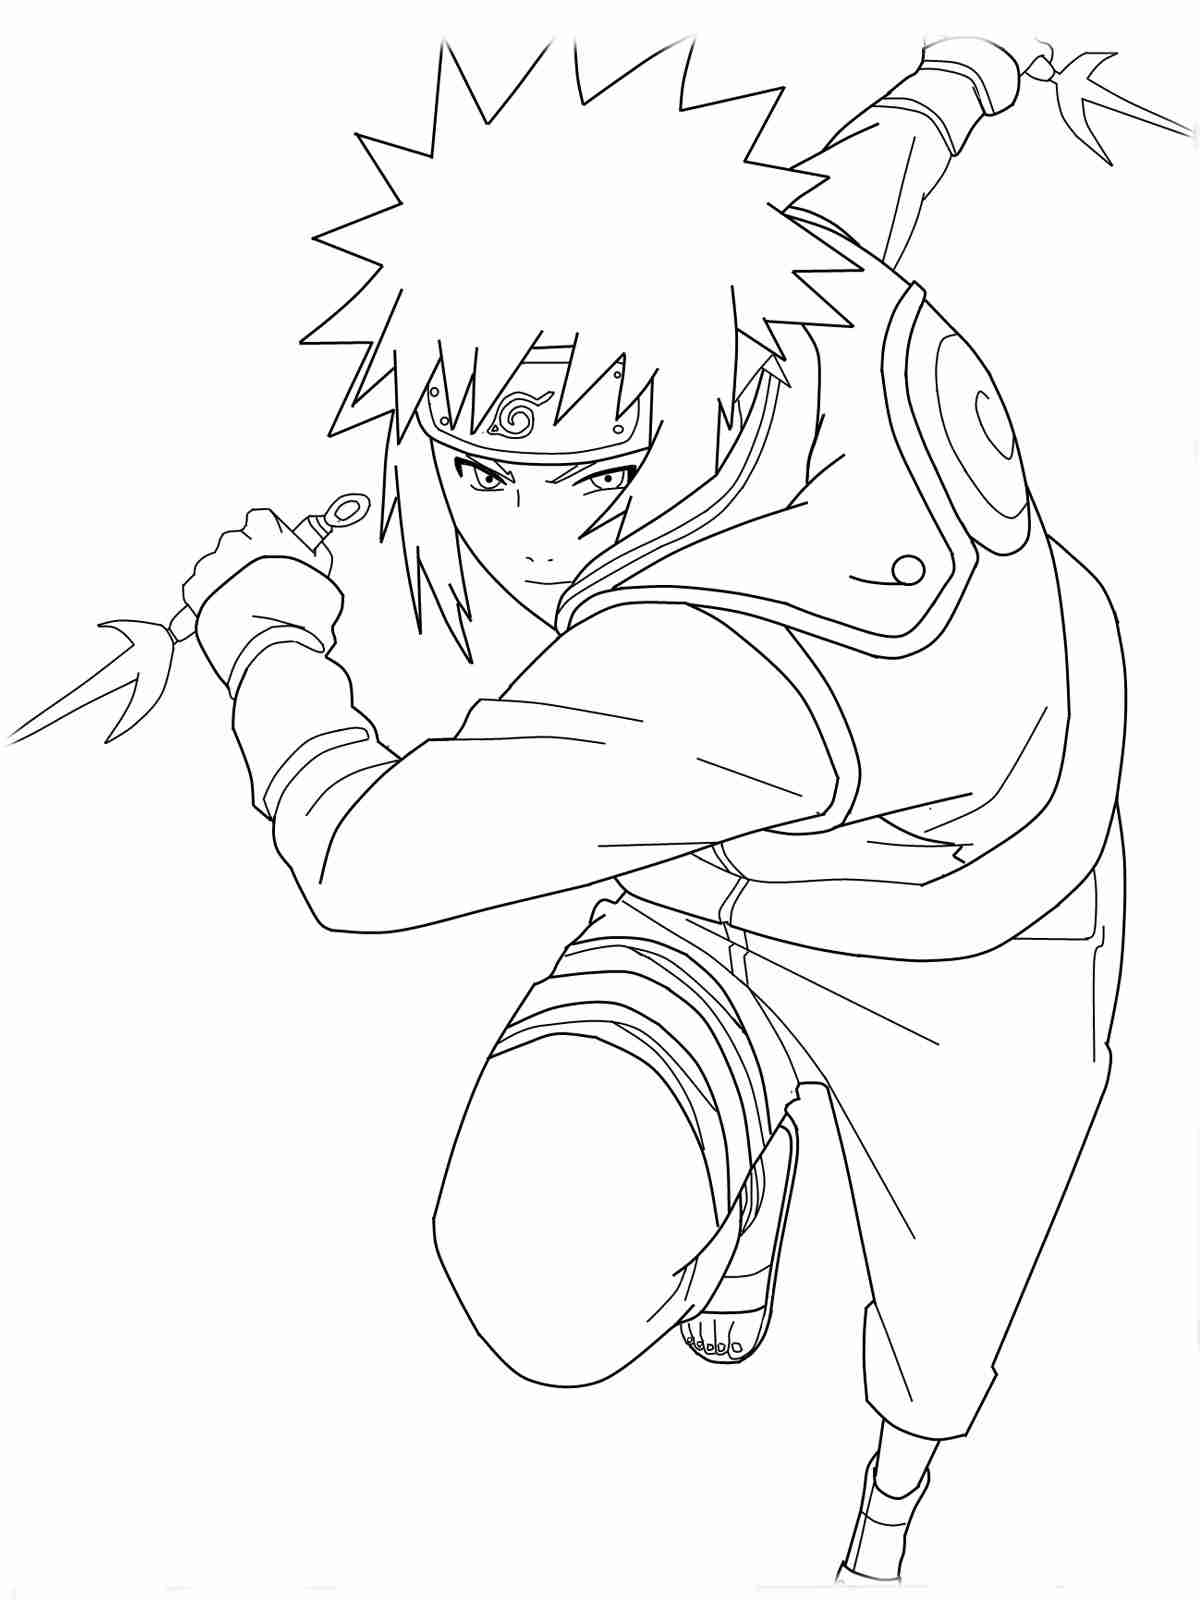 Namikaze Minato is known as Yellow Flash Coloring Page